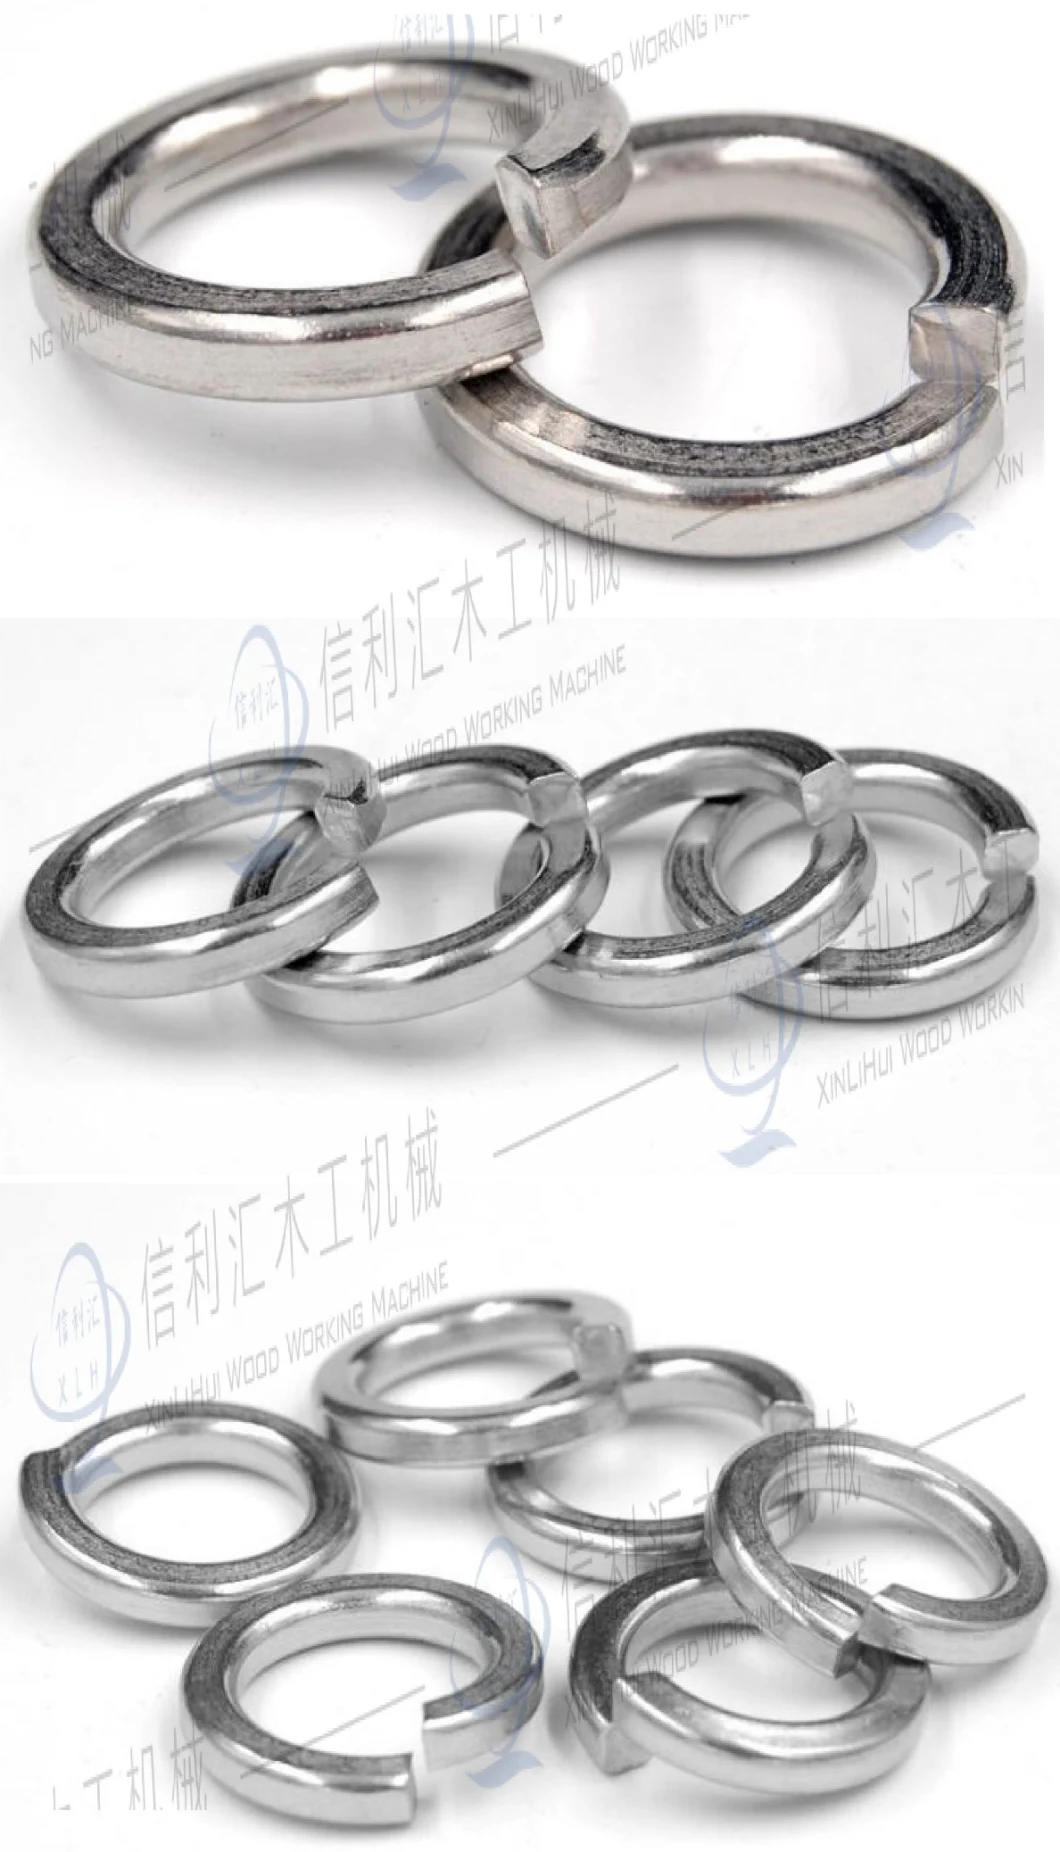 Titanium Alloy Washer High Quality Galvanized Carbon Steel Light Spring Washer